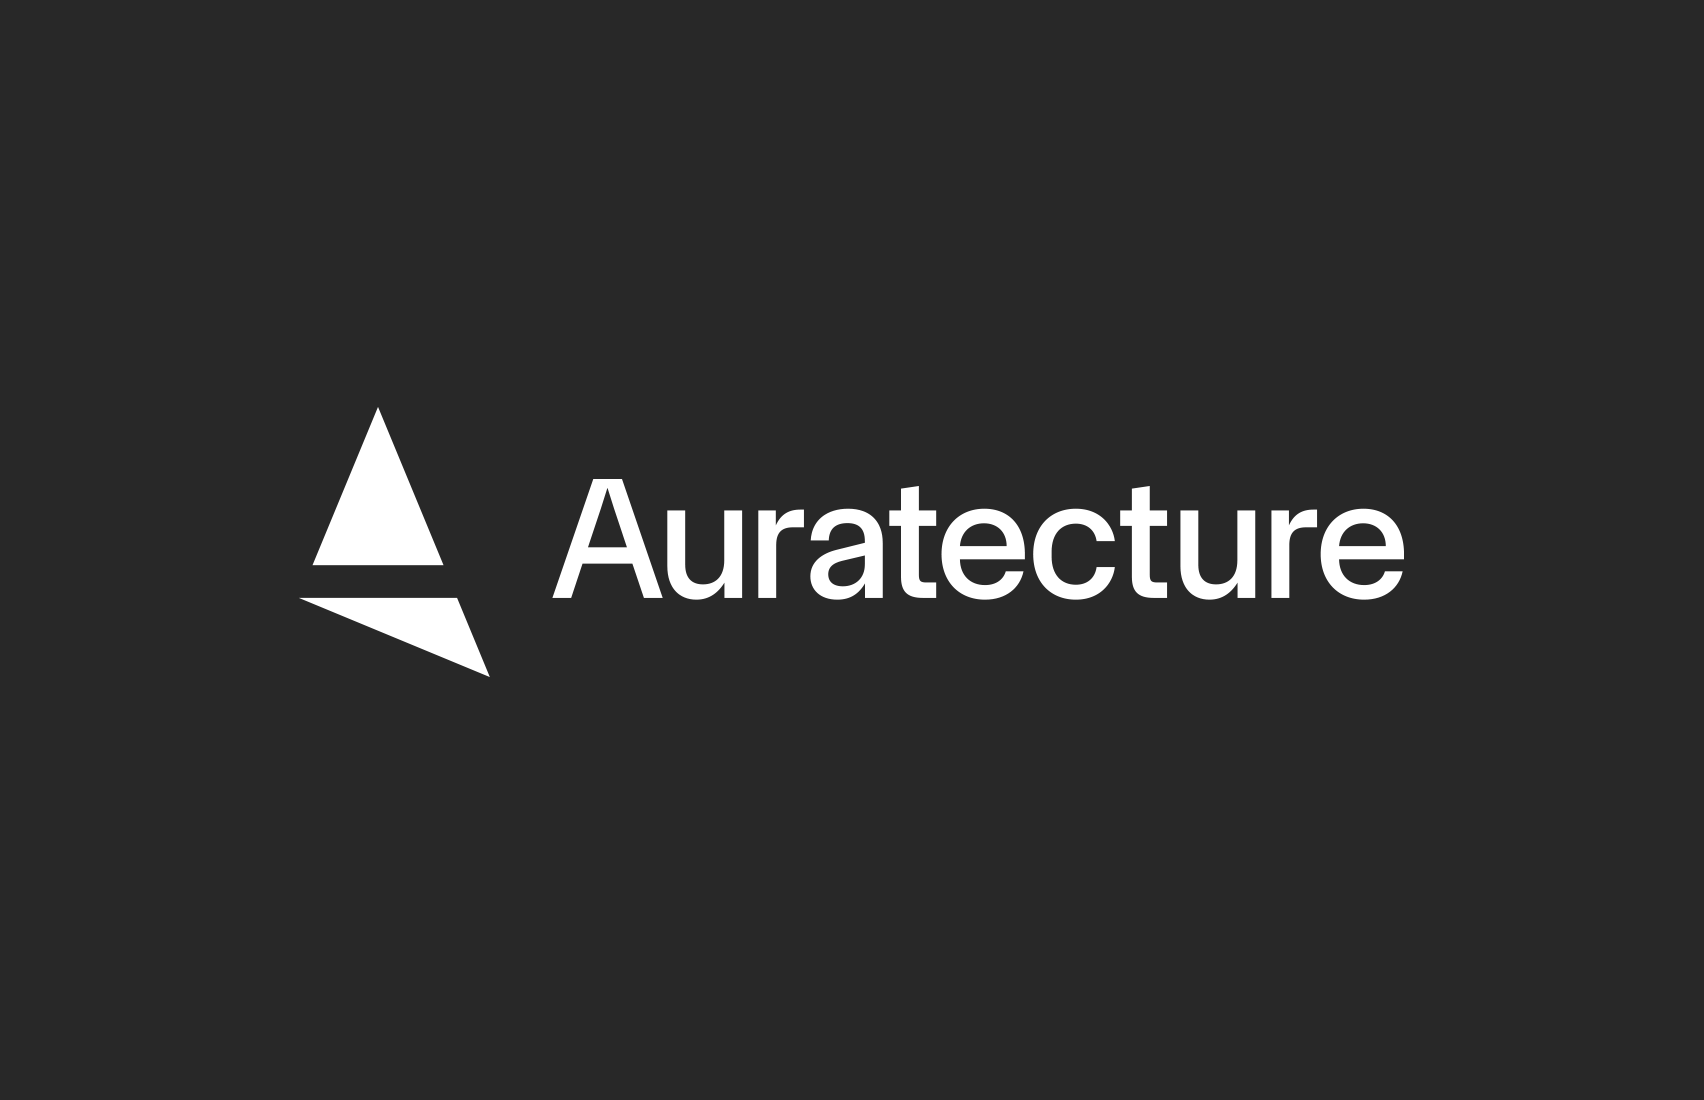 Auratecture logo